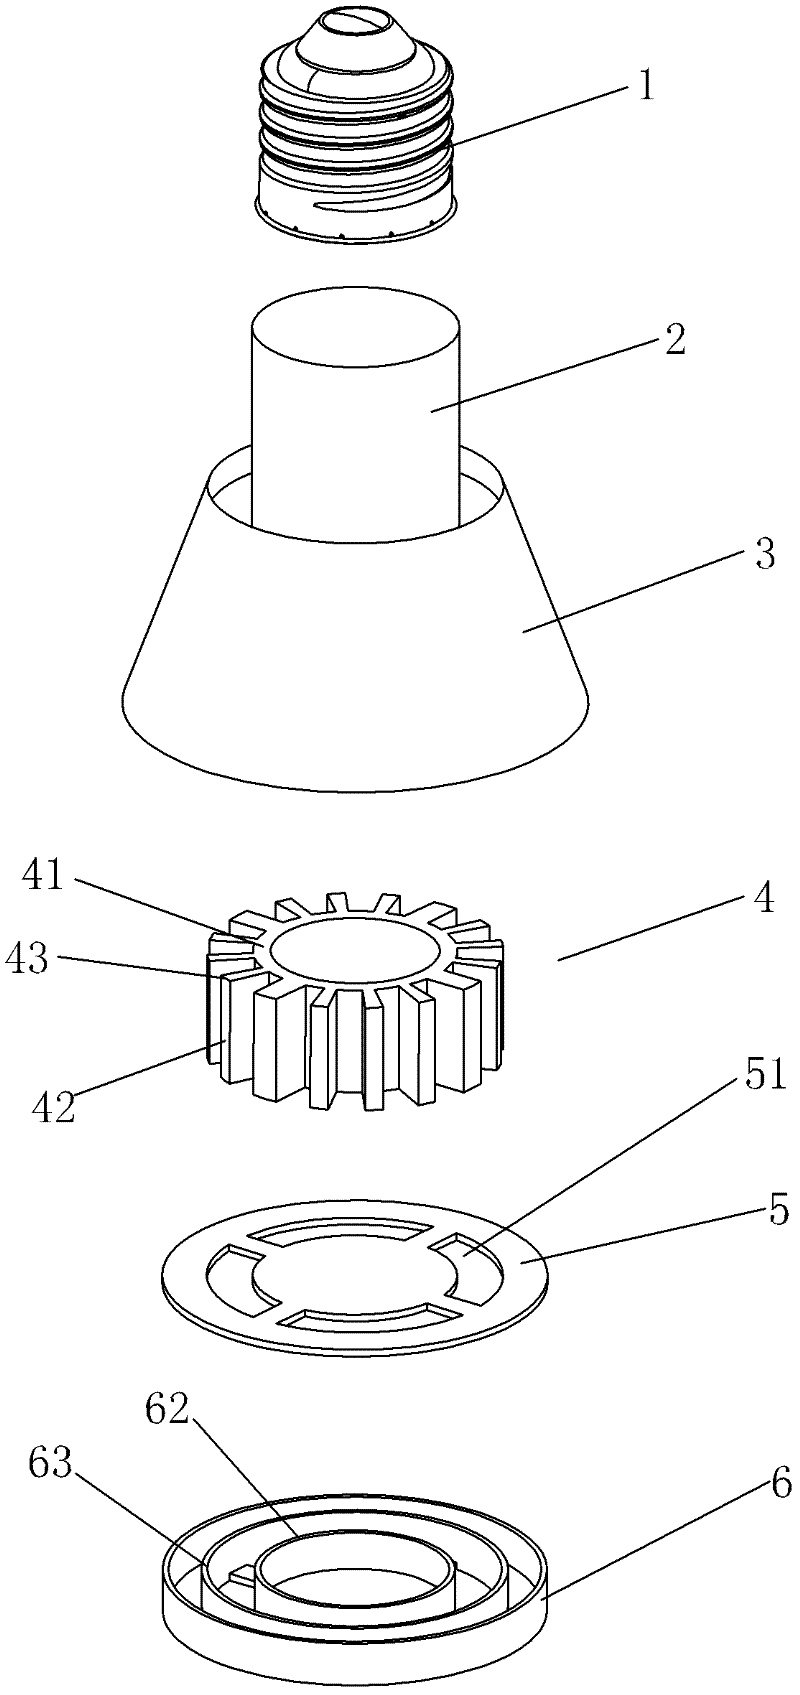 LED (Light-Emitting Diode) lamp with heat radiation structure